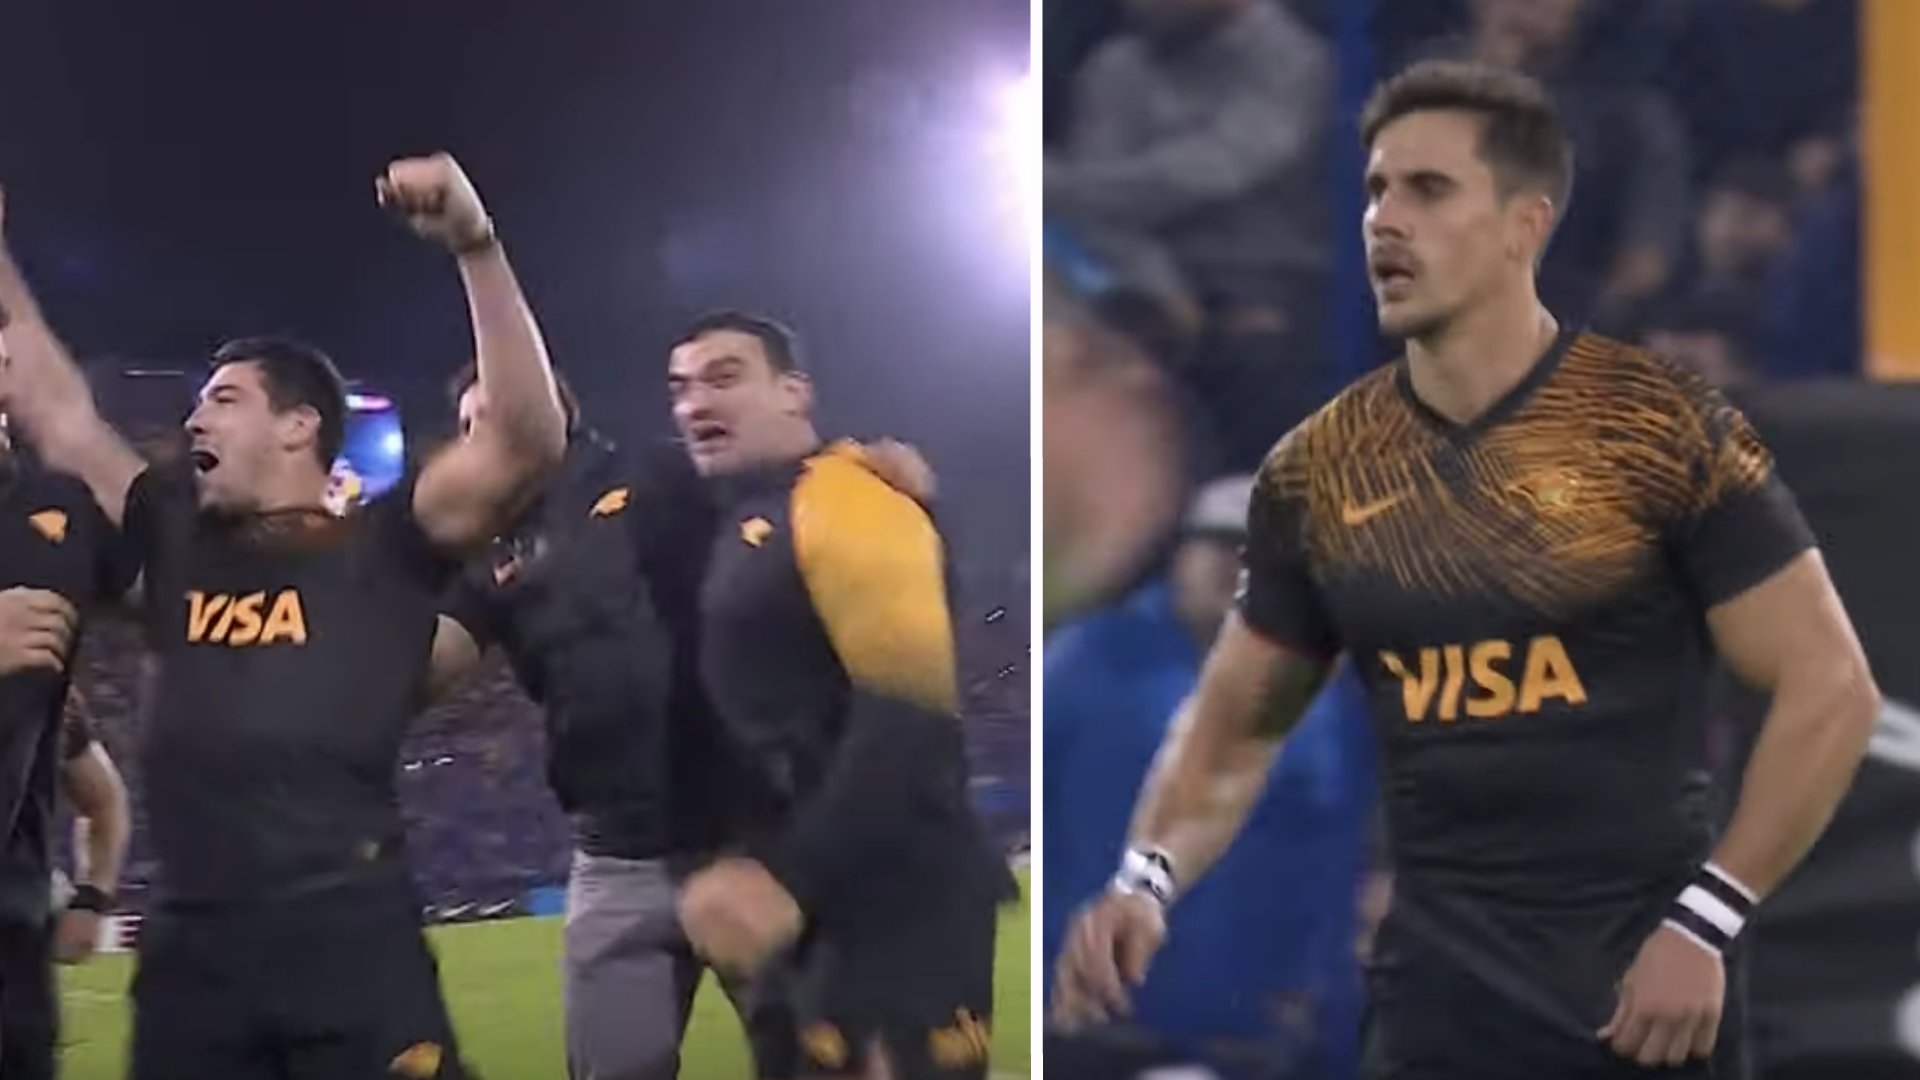 Jaguares destroy Brumbies to become first Argentinian team to Super Rugby reach final